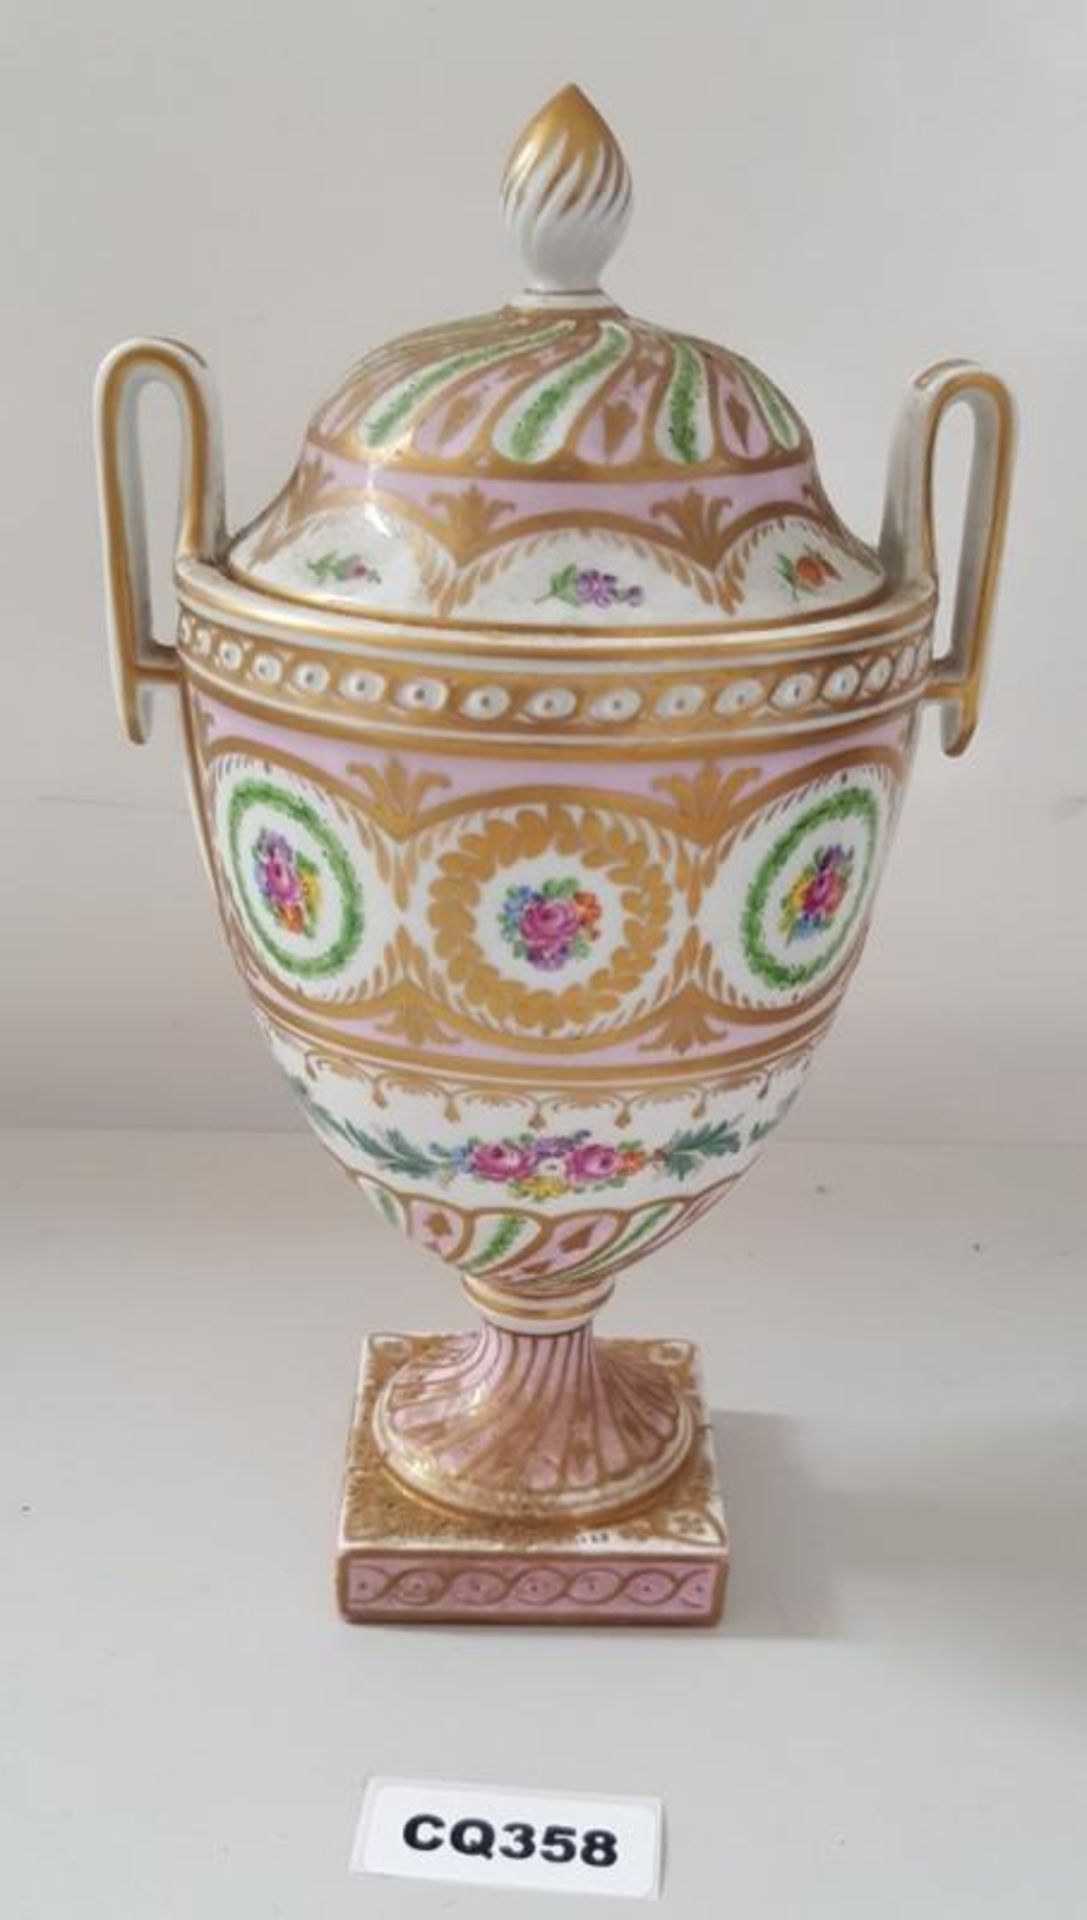 1 x ANTIQUE DRESDEN PORCELAIN TWIN HANDLE VASE IN GOLD AND WHITE - Ref CQ358 E - CL334 - Location: A